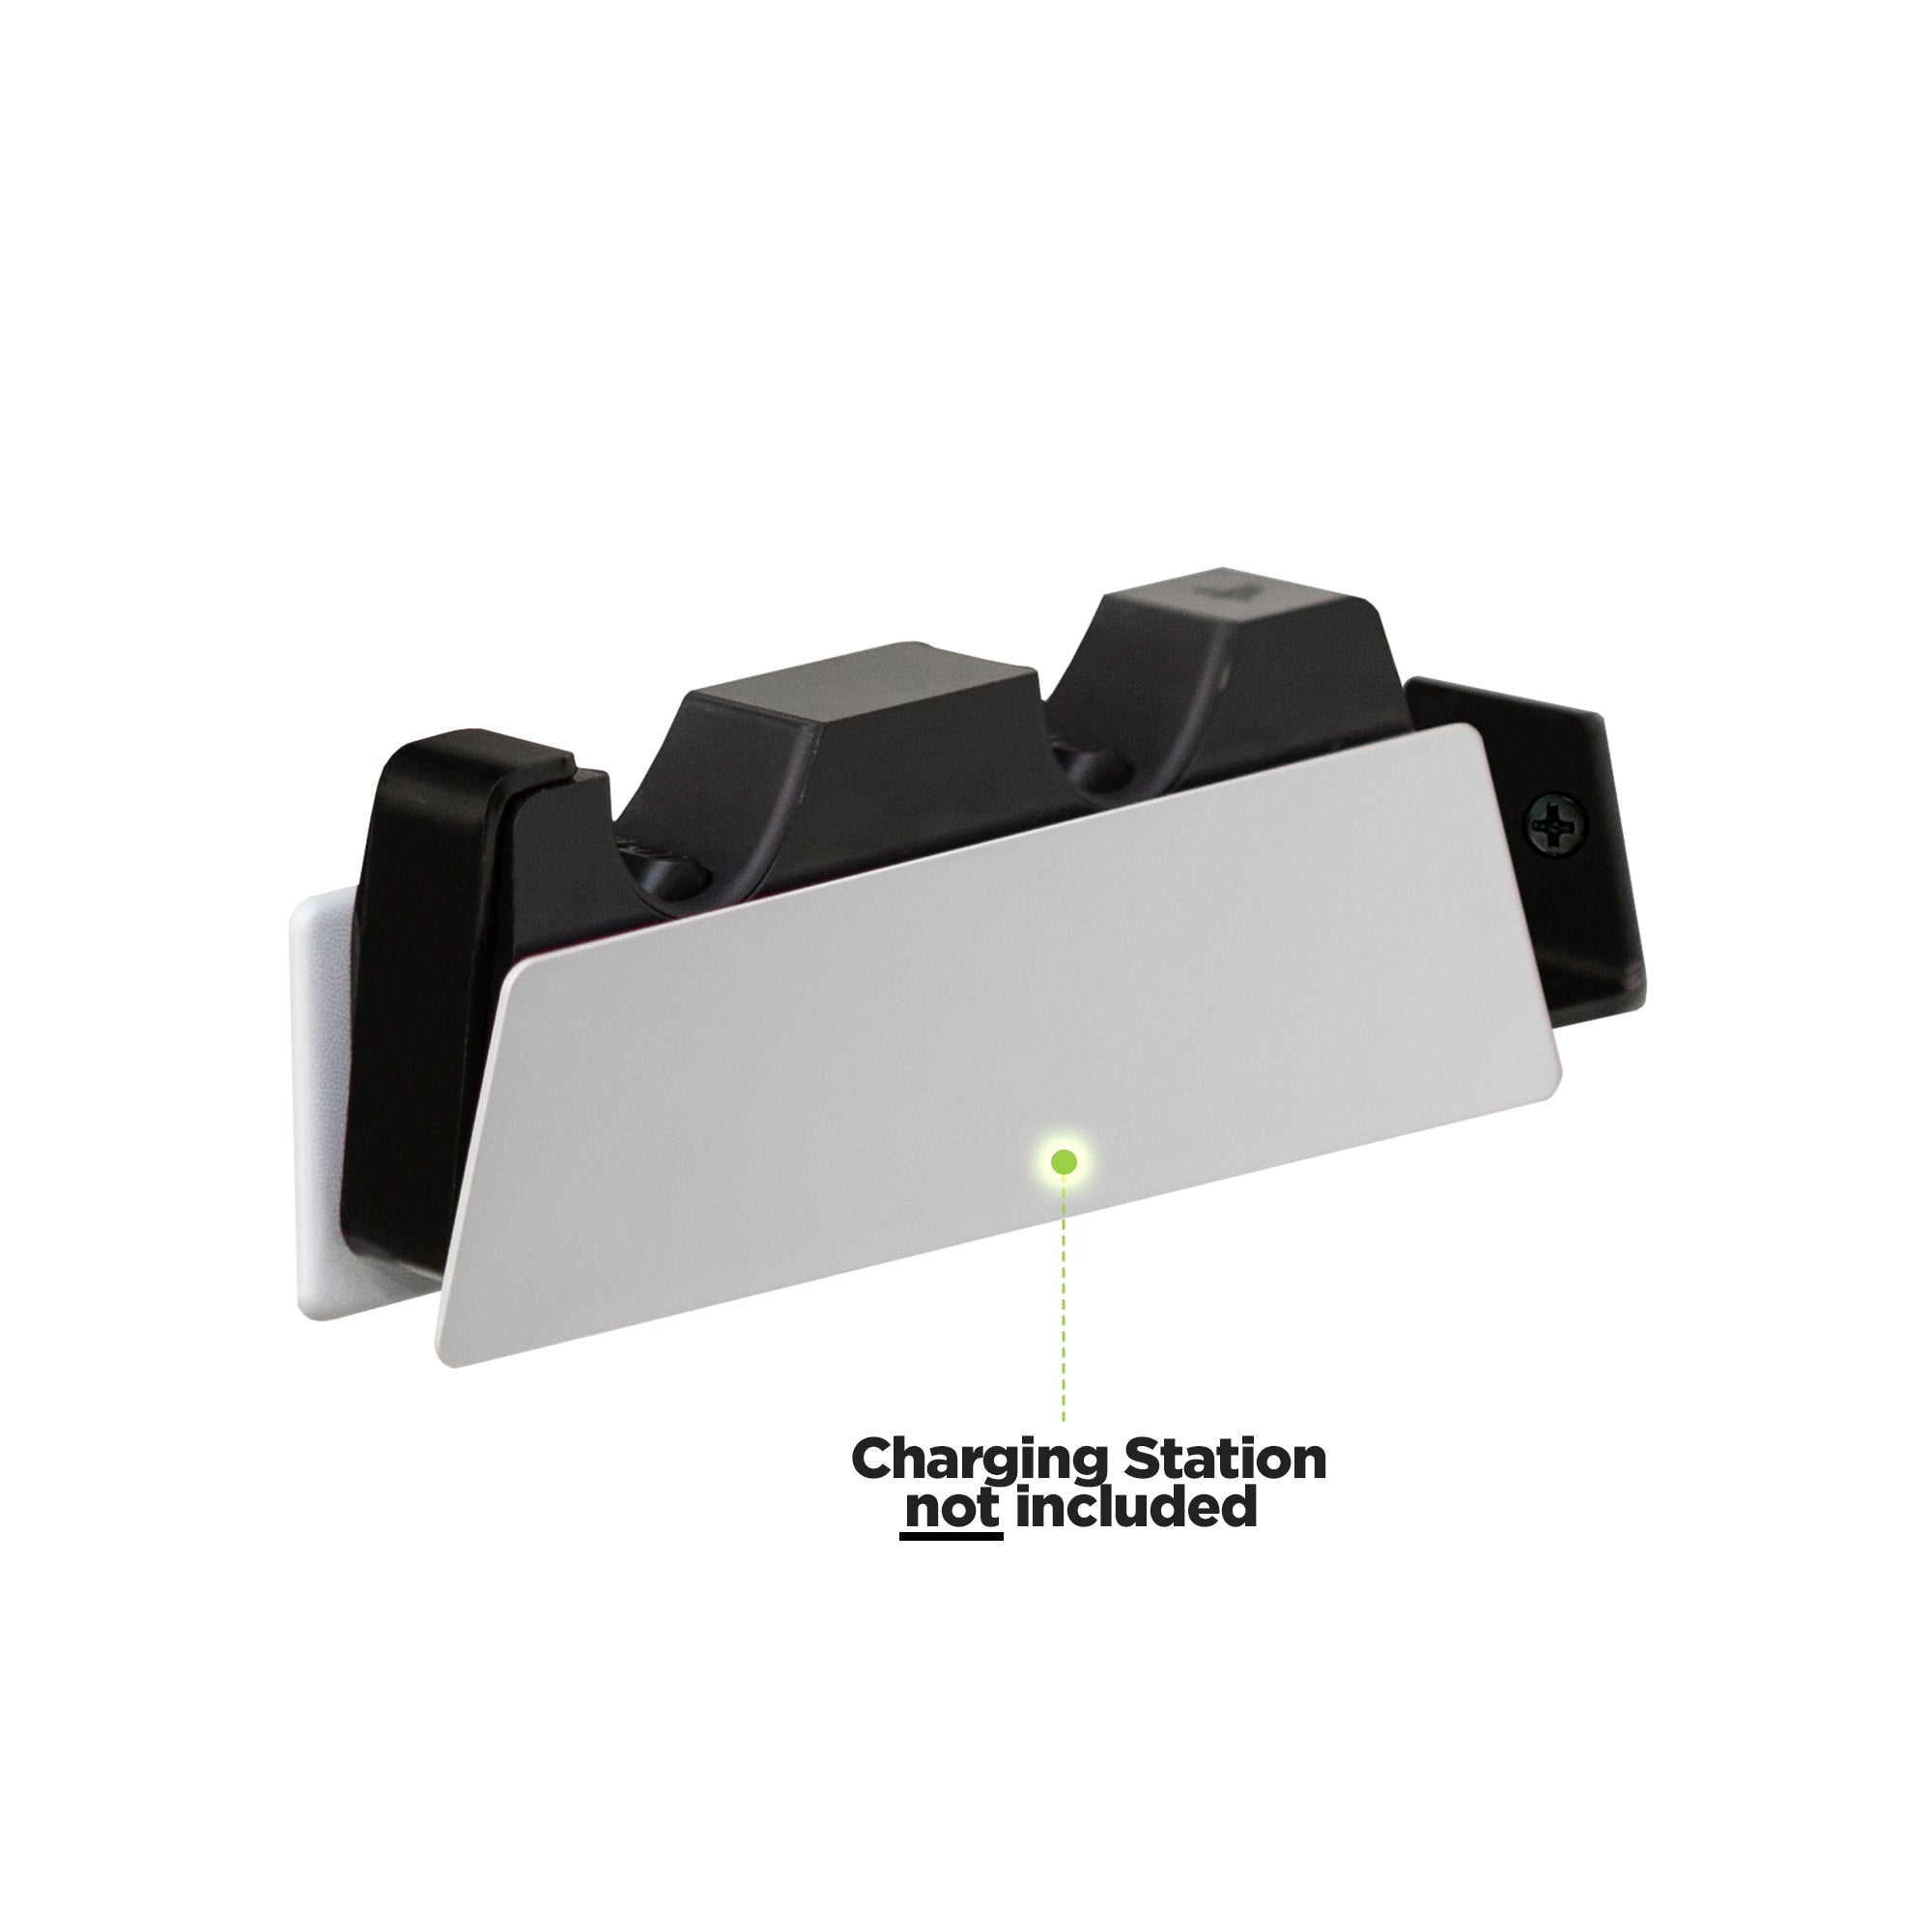 DualSense charging station shown in the HIDEit Wall Mount for the PS5 controller charger.